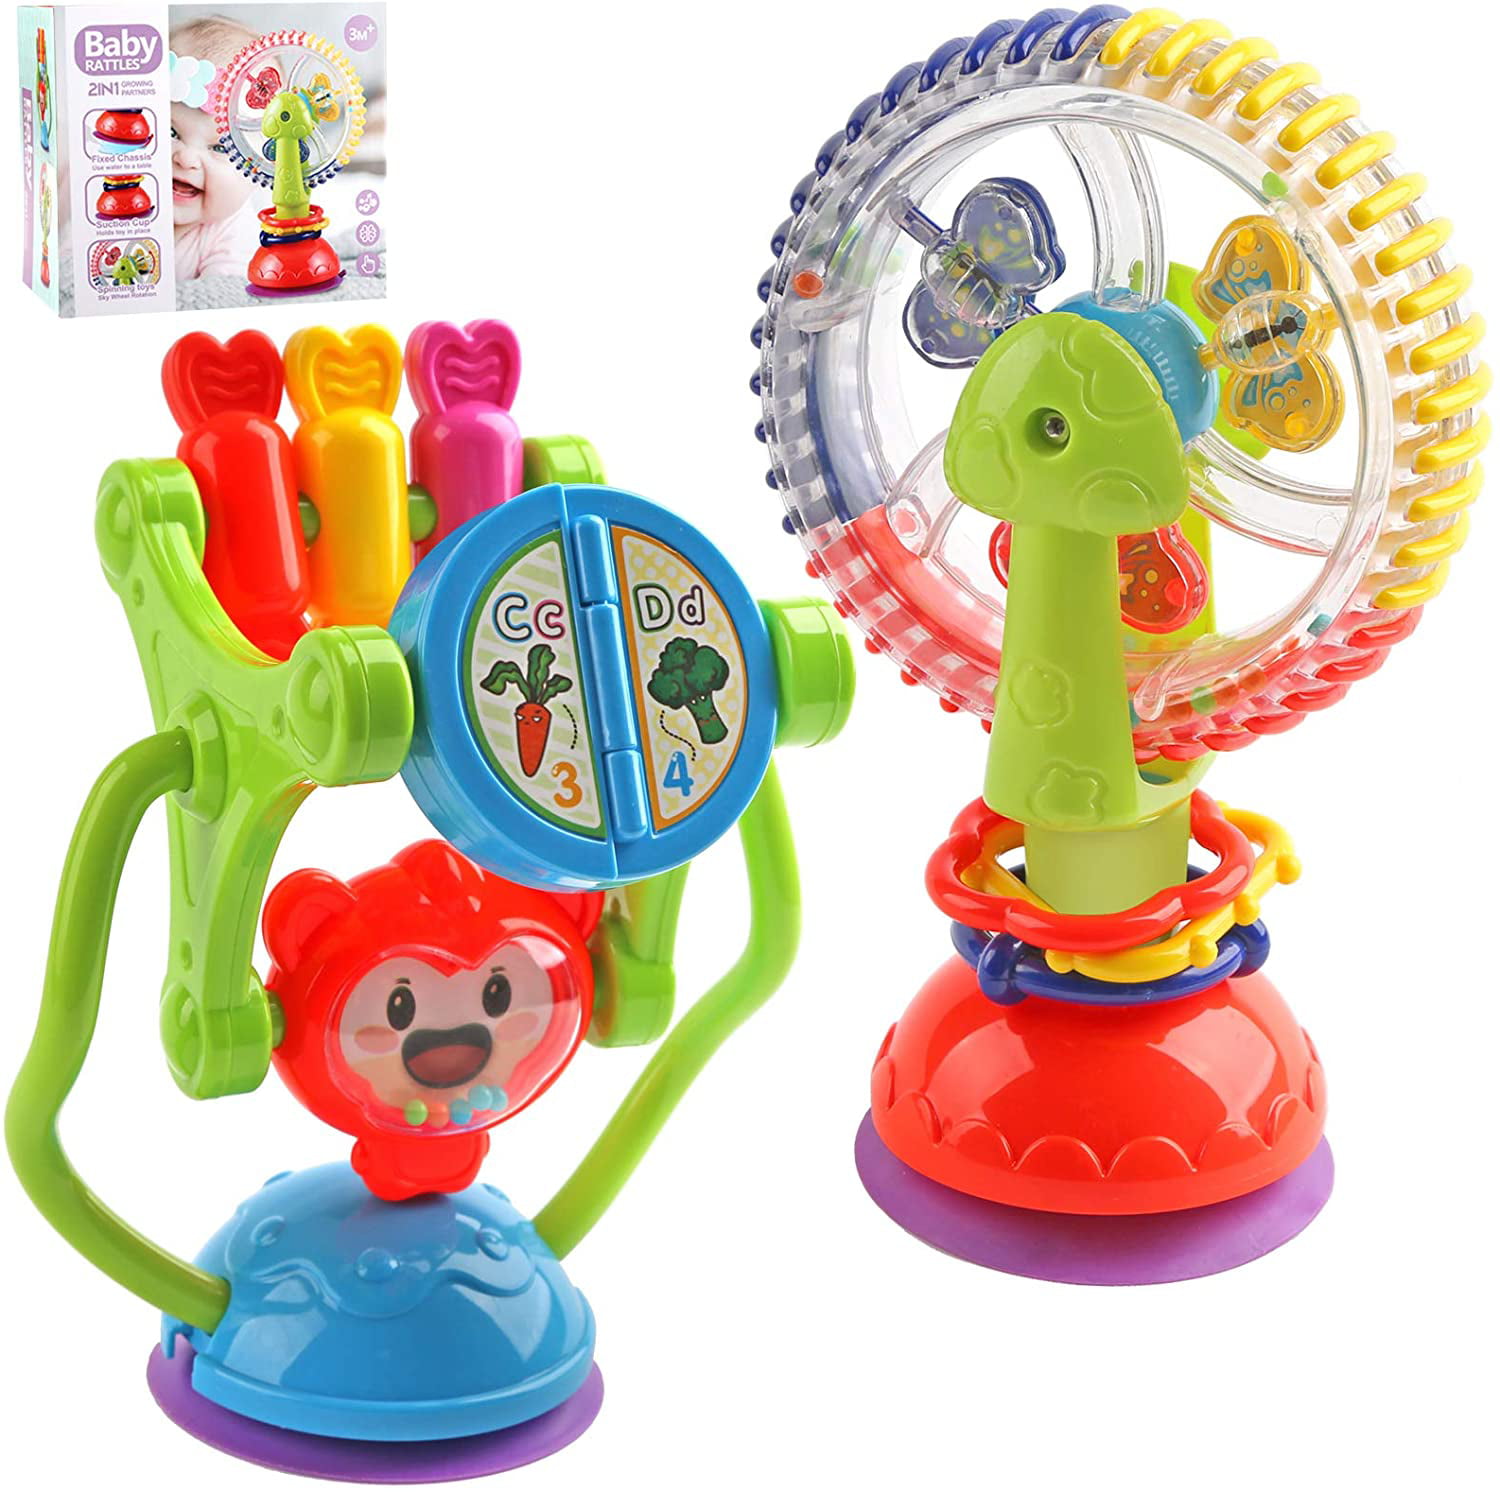 2 x A TO Z BABY RATTLE VEHICLE WITH LIGHT & SOUND ASSORTED SHAPE